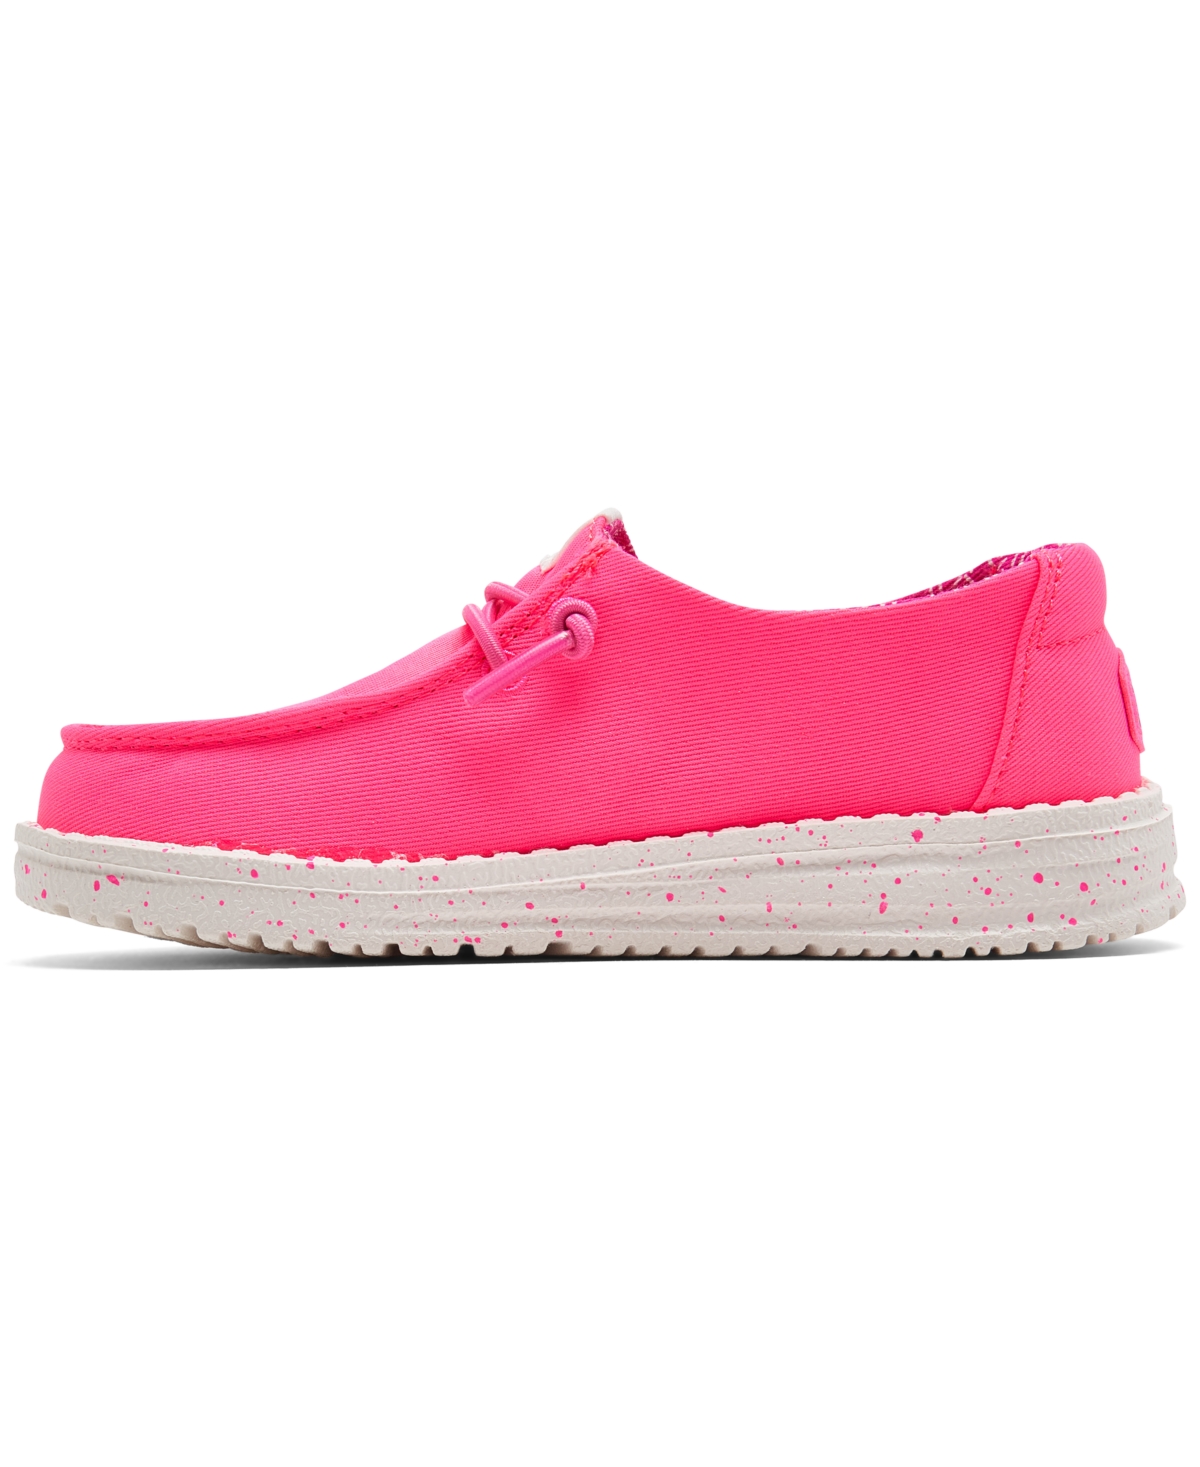 Shop Hey Dude Toddler Girls' Wendy Canvas Casual Moccasin Sneakers From Finish Line In Pink